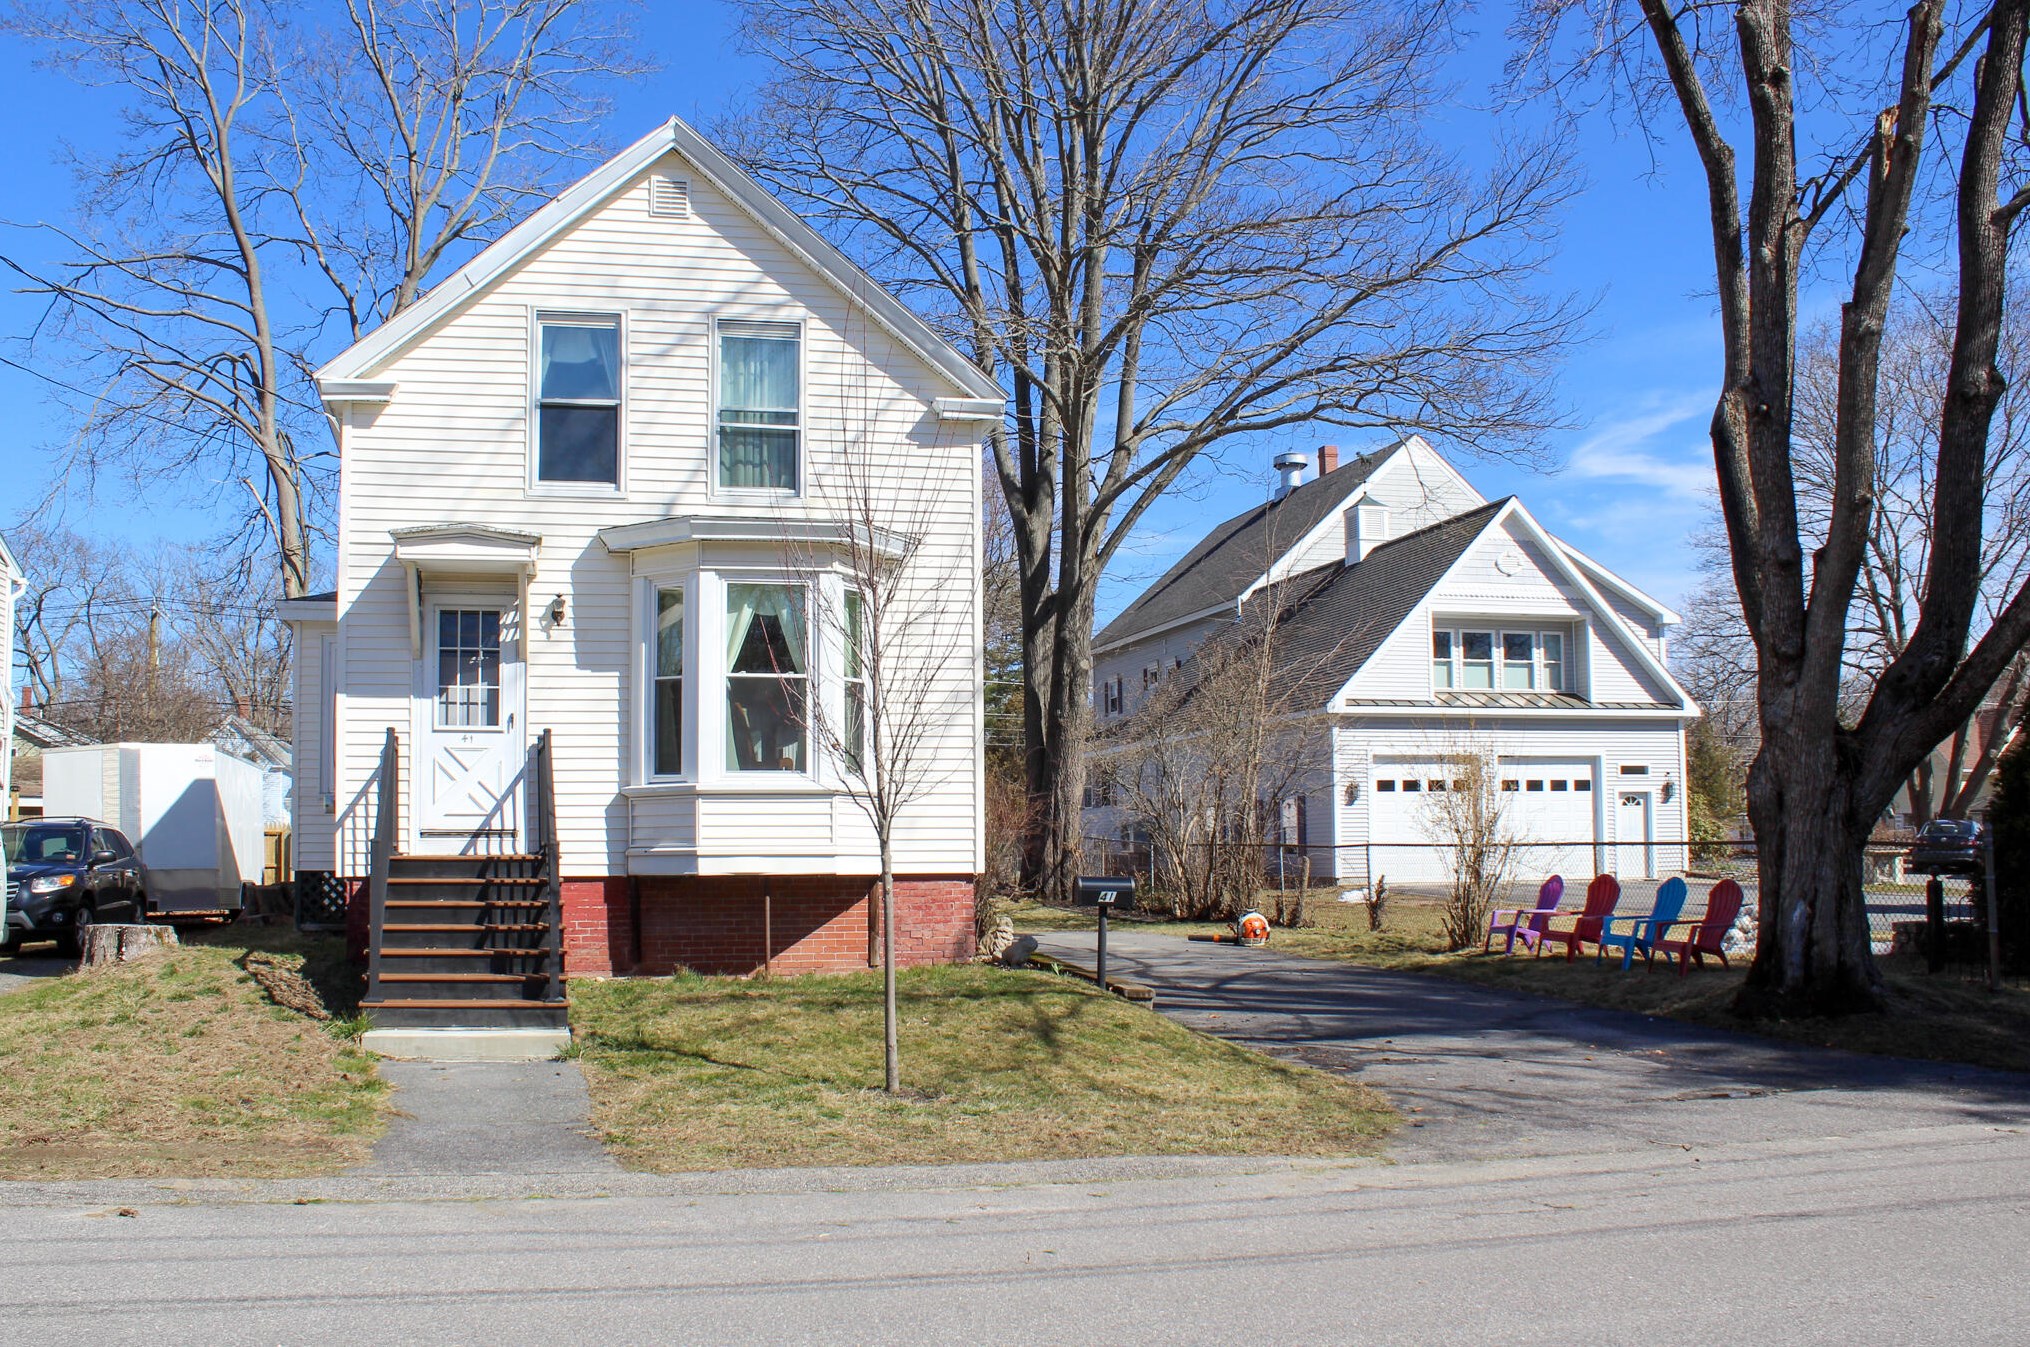 41 Pennell St, Westbrook, ME 04092